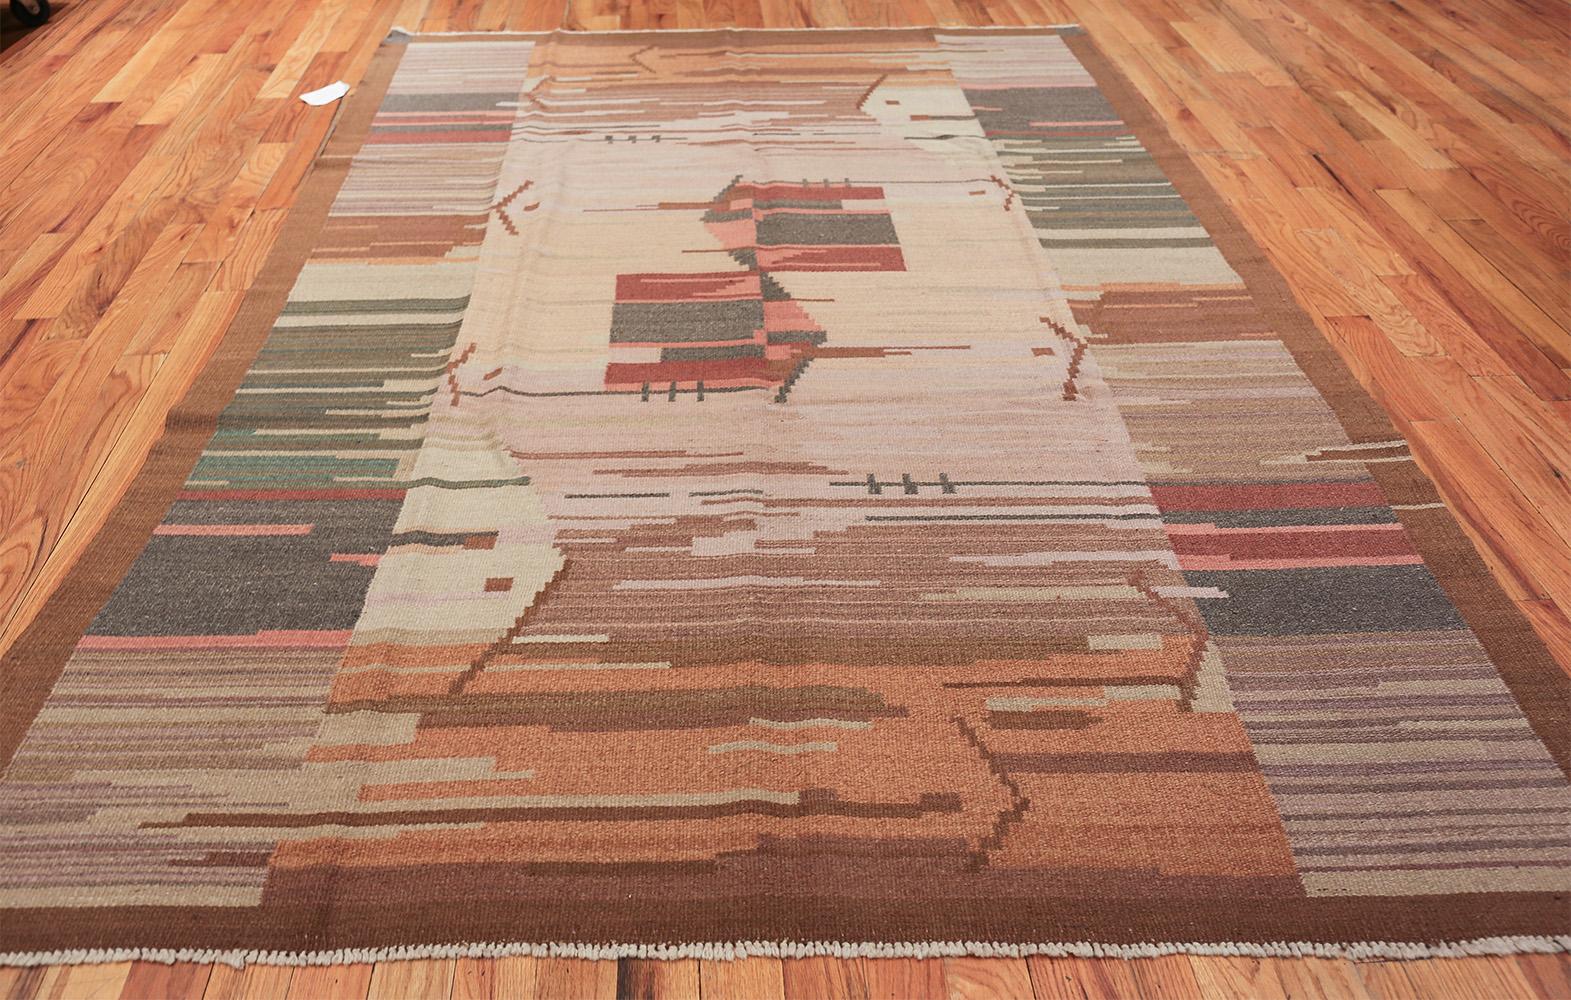 Vintage Swedish rug, origin: Sweden, circa mid-20th century – Size: 6 ft 6 in x 9 ft 9 in (1.98 m x 2.97 m)

This inventive vintage Swedish rug showcases a distinctive combination of abstract design elements with geometric features that embody an